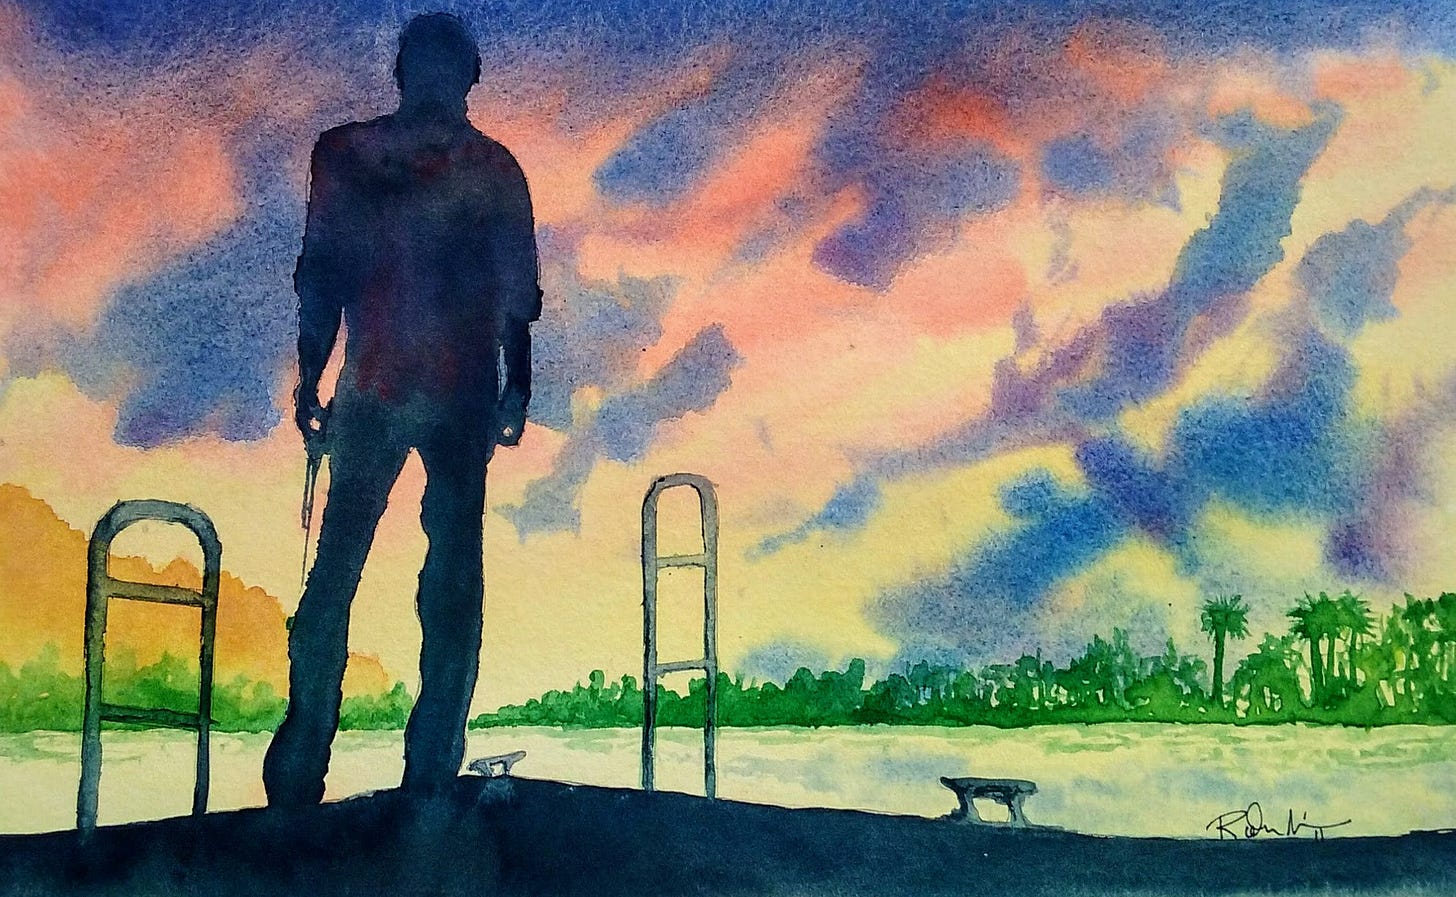 Watercolor illustration of Anthony Bourdain looking over a pier